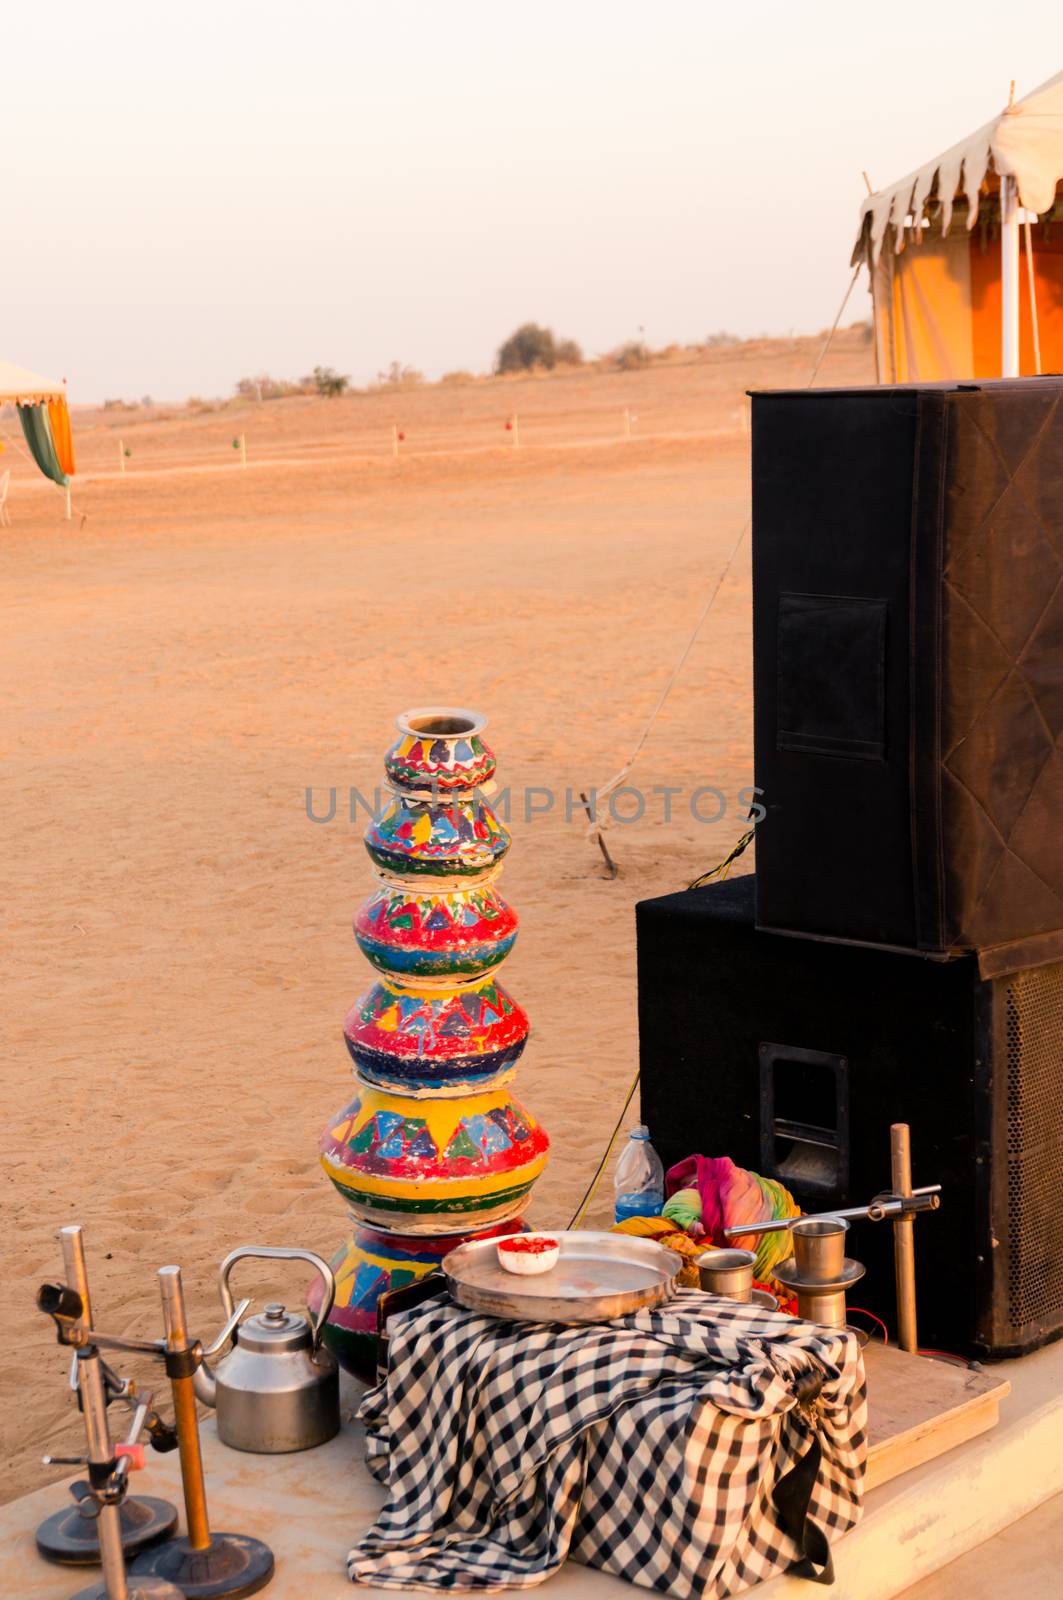 Evening shot showing the props like clayware pots, clay pots, dishes, kettle, mics and more as props for traditional rajasthani dances for visitor entertainment at a desert camp by Shalinimathur